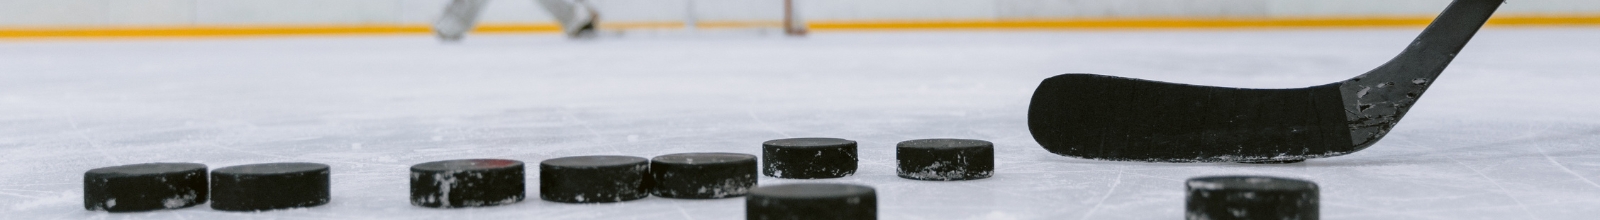 A group of hockey pucks sit on ice with a hockey stick